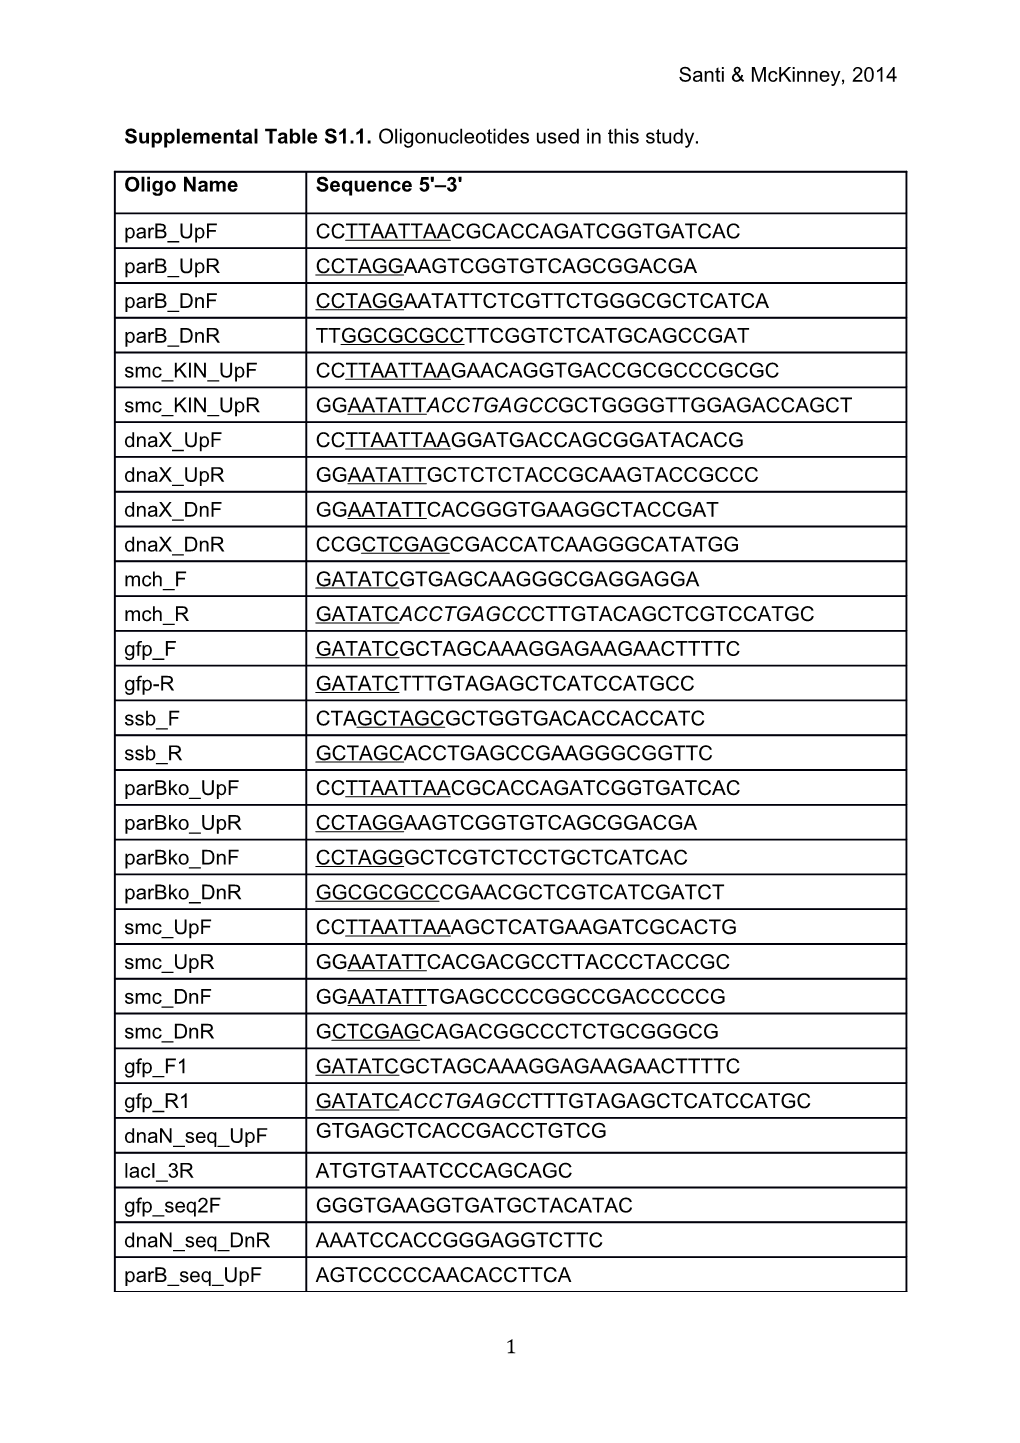 Supplemental Table S1.1. Oligonucleotides Used in This Study